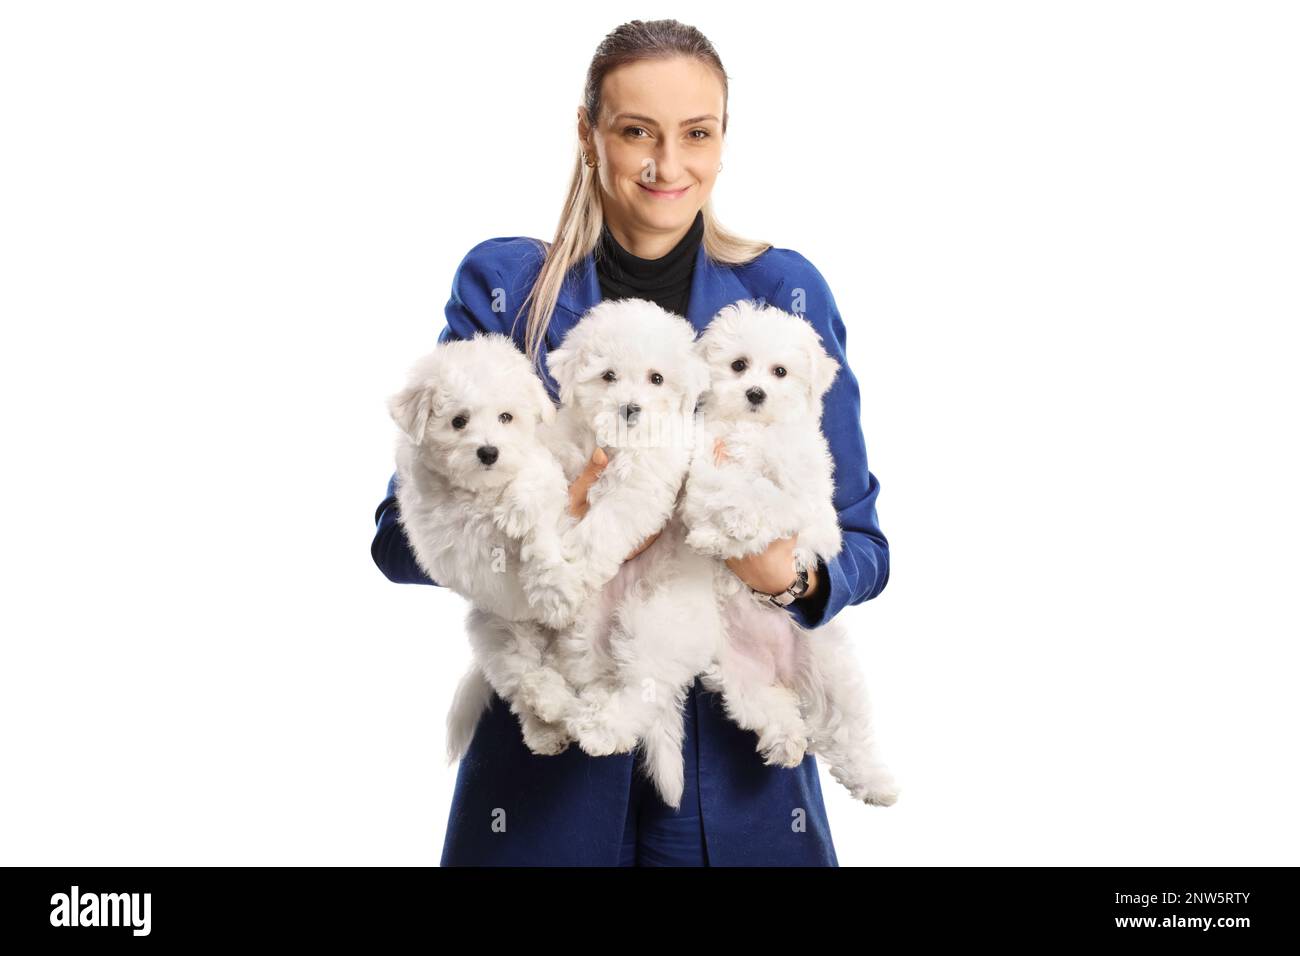 Woman holding three bichon frise puppies and smiling isolated on white background Stock Photo